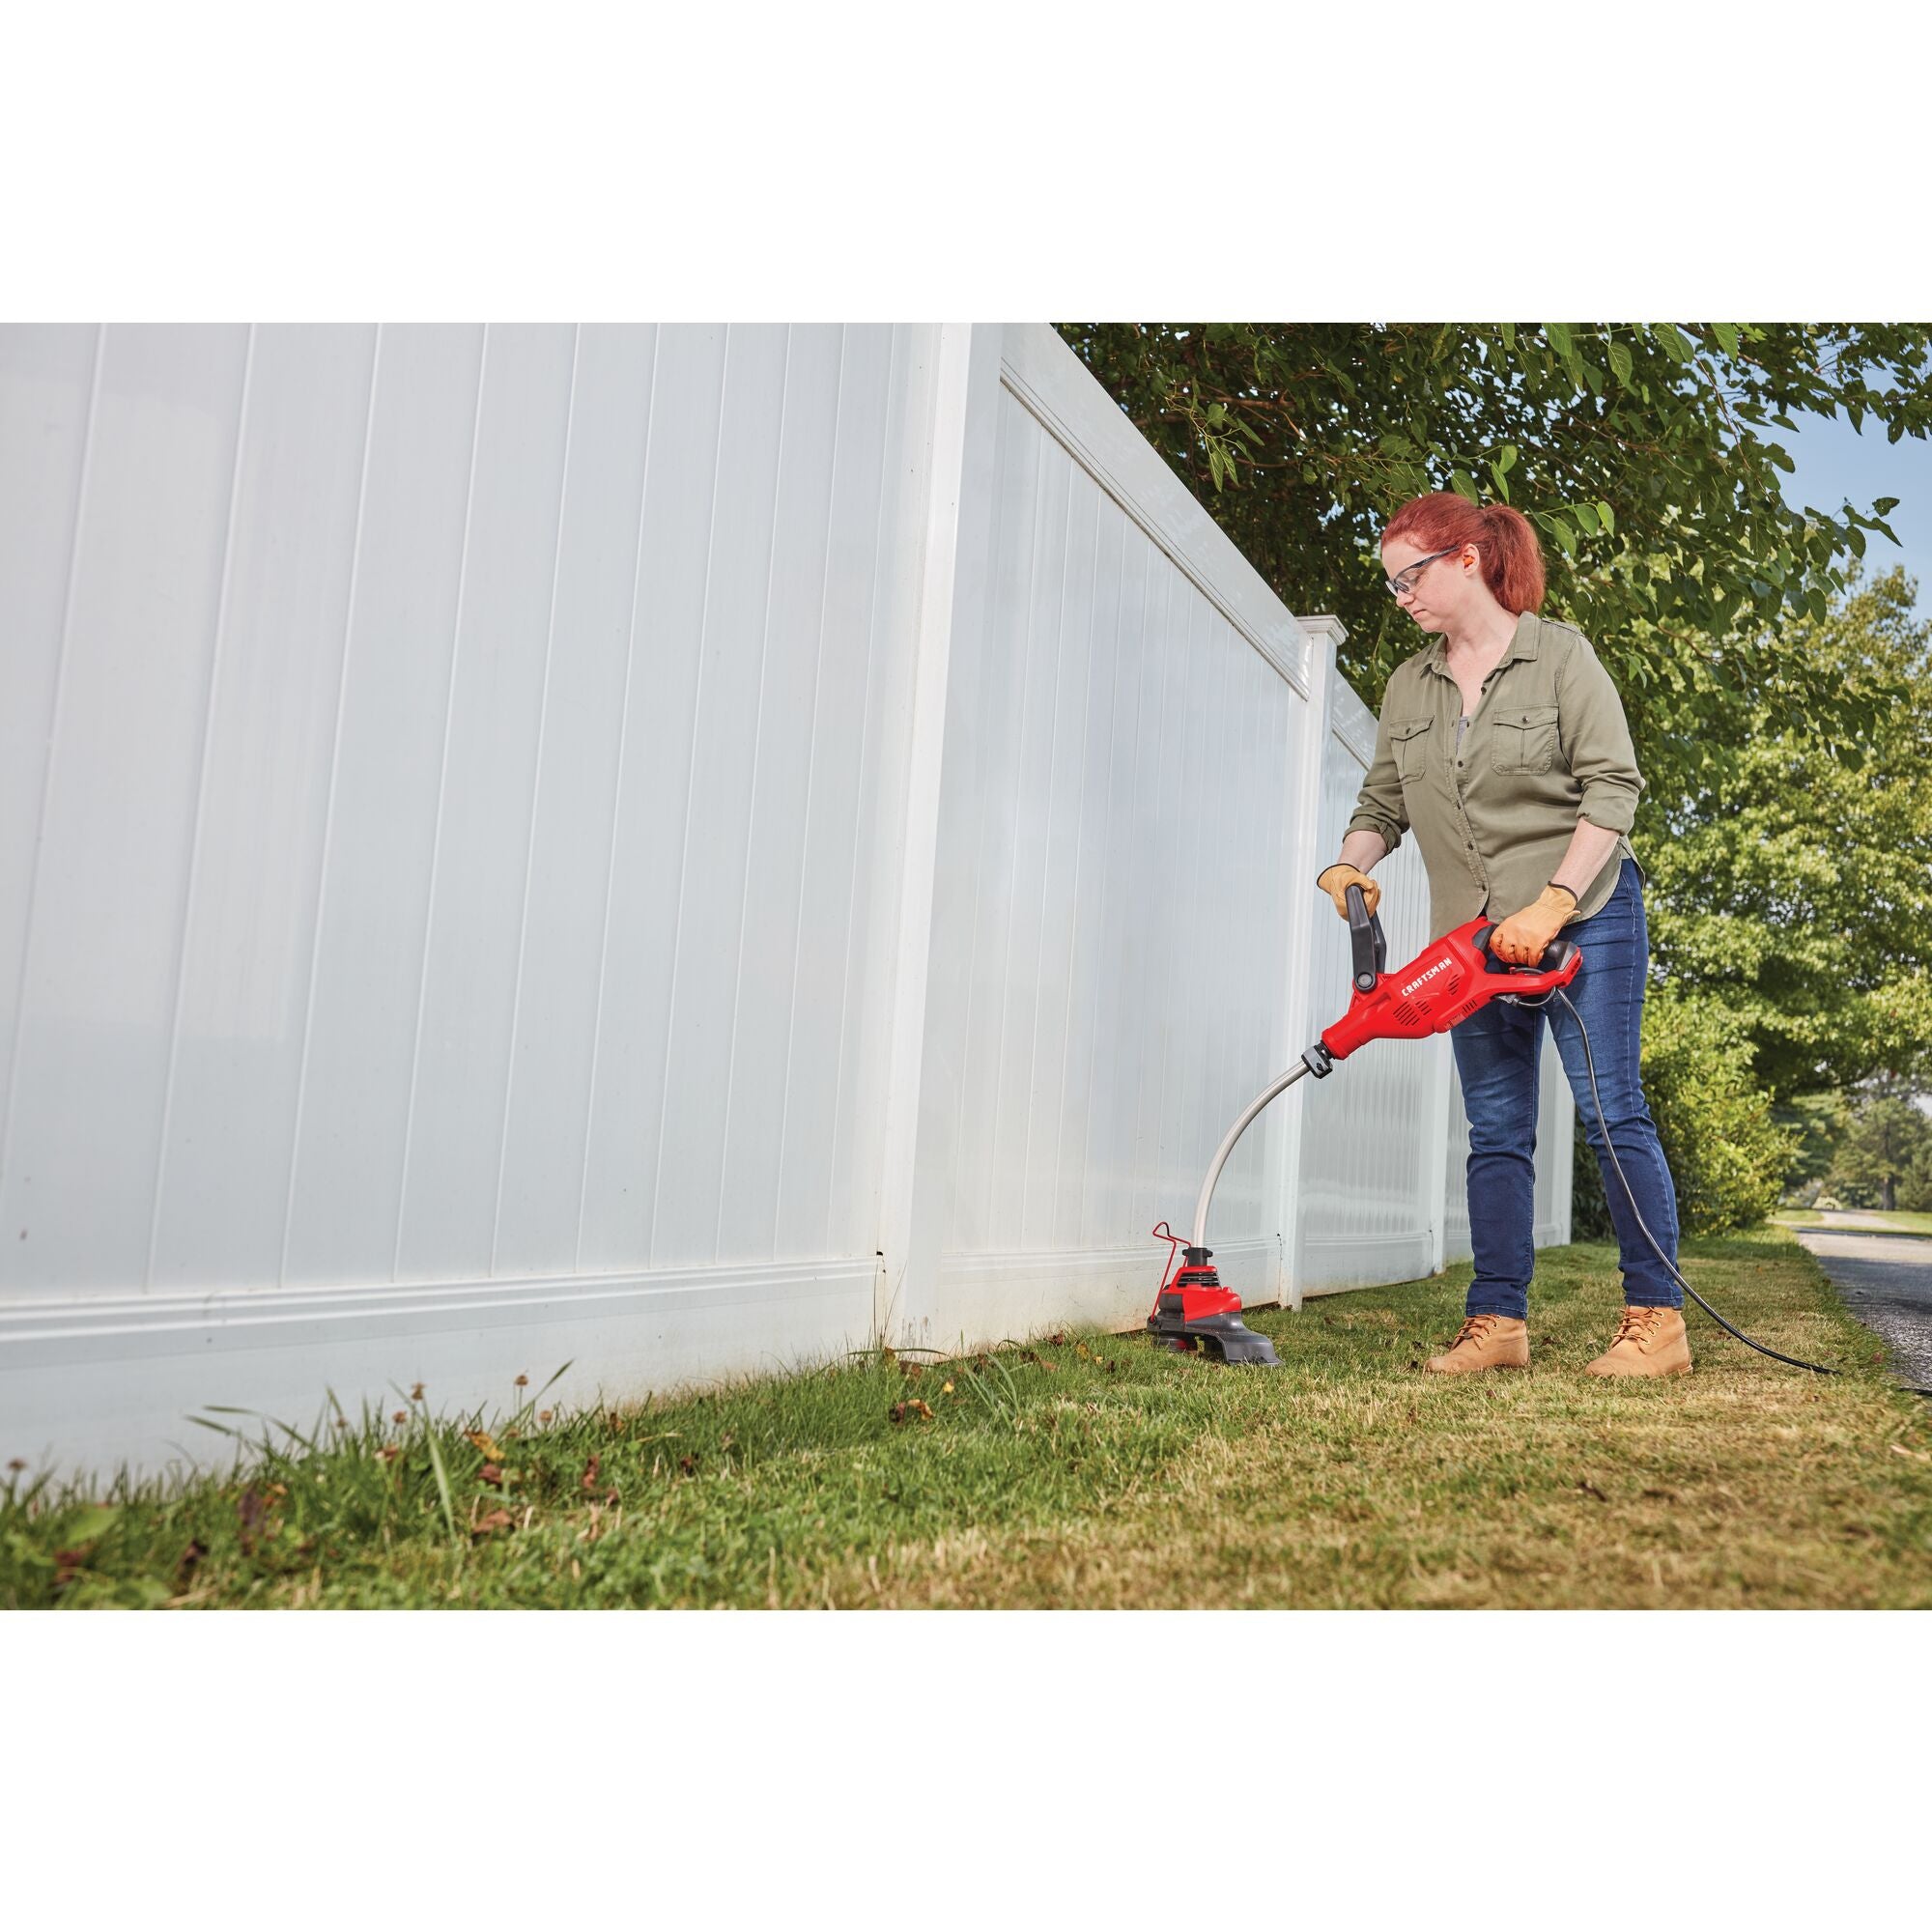 Weedwacker 8 dot 5 amp 14 inch corded electric string trimmer.